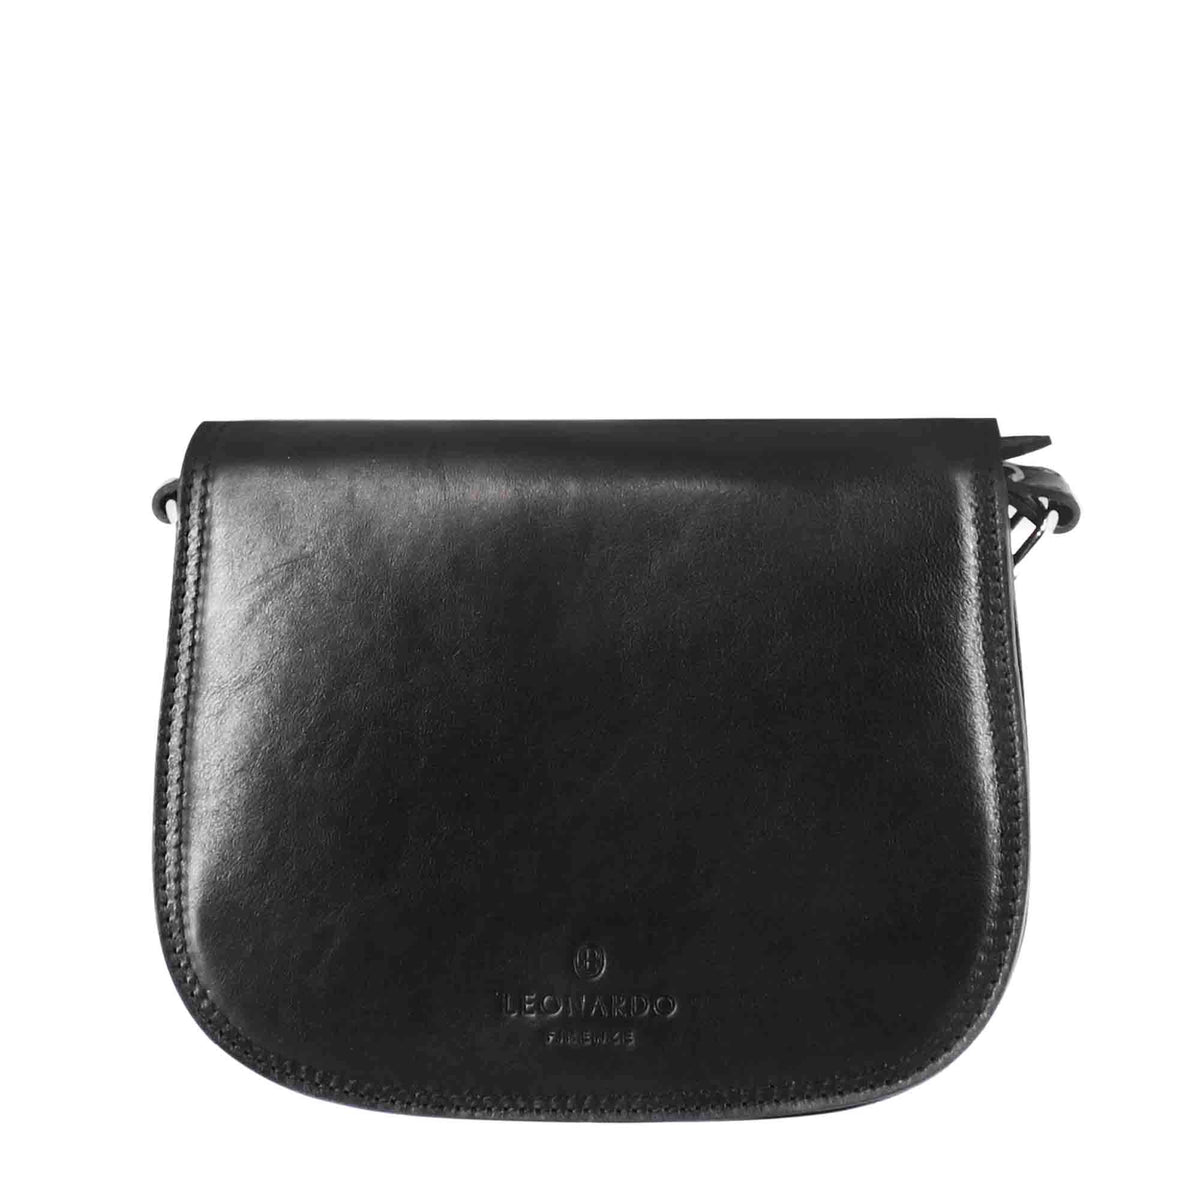 Essential women's bag in black smooth leather